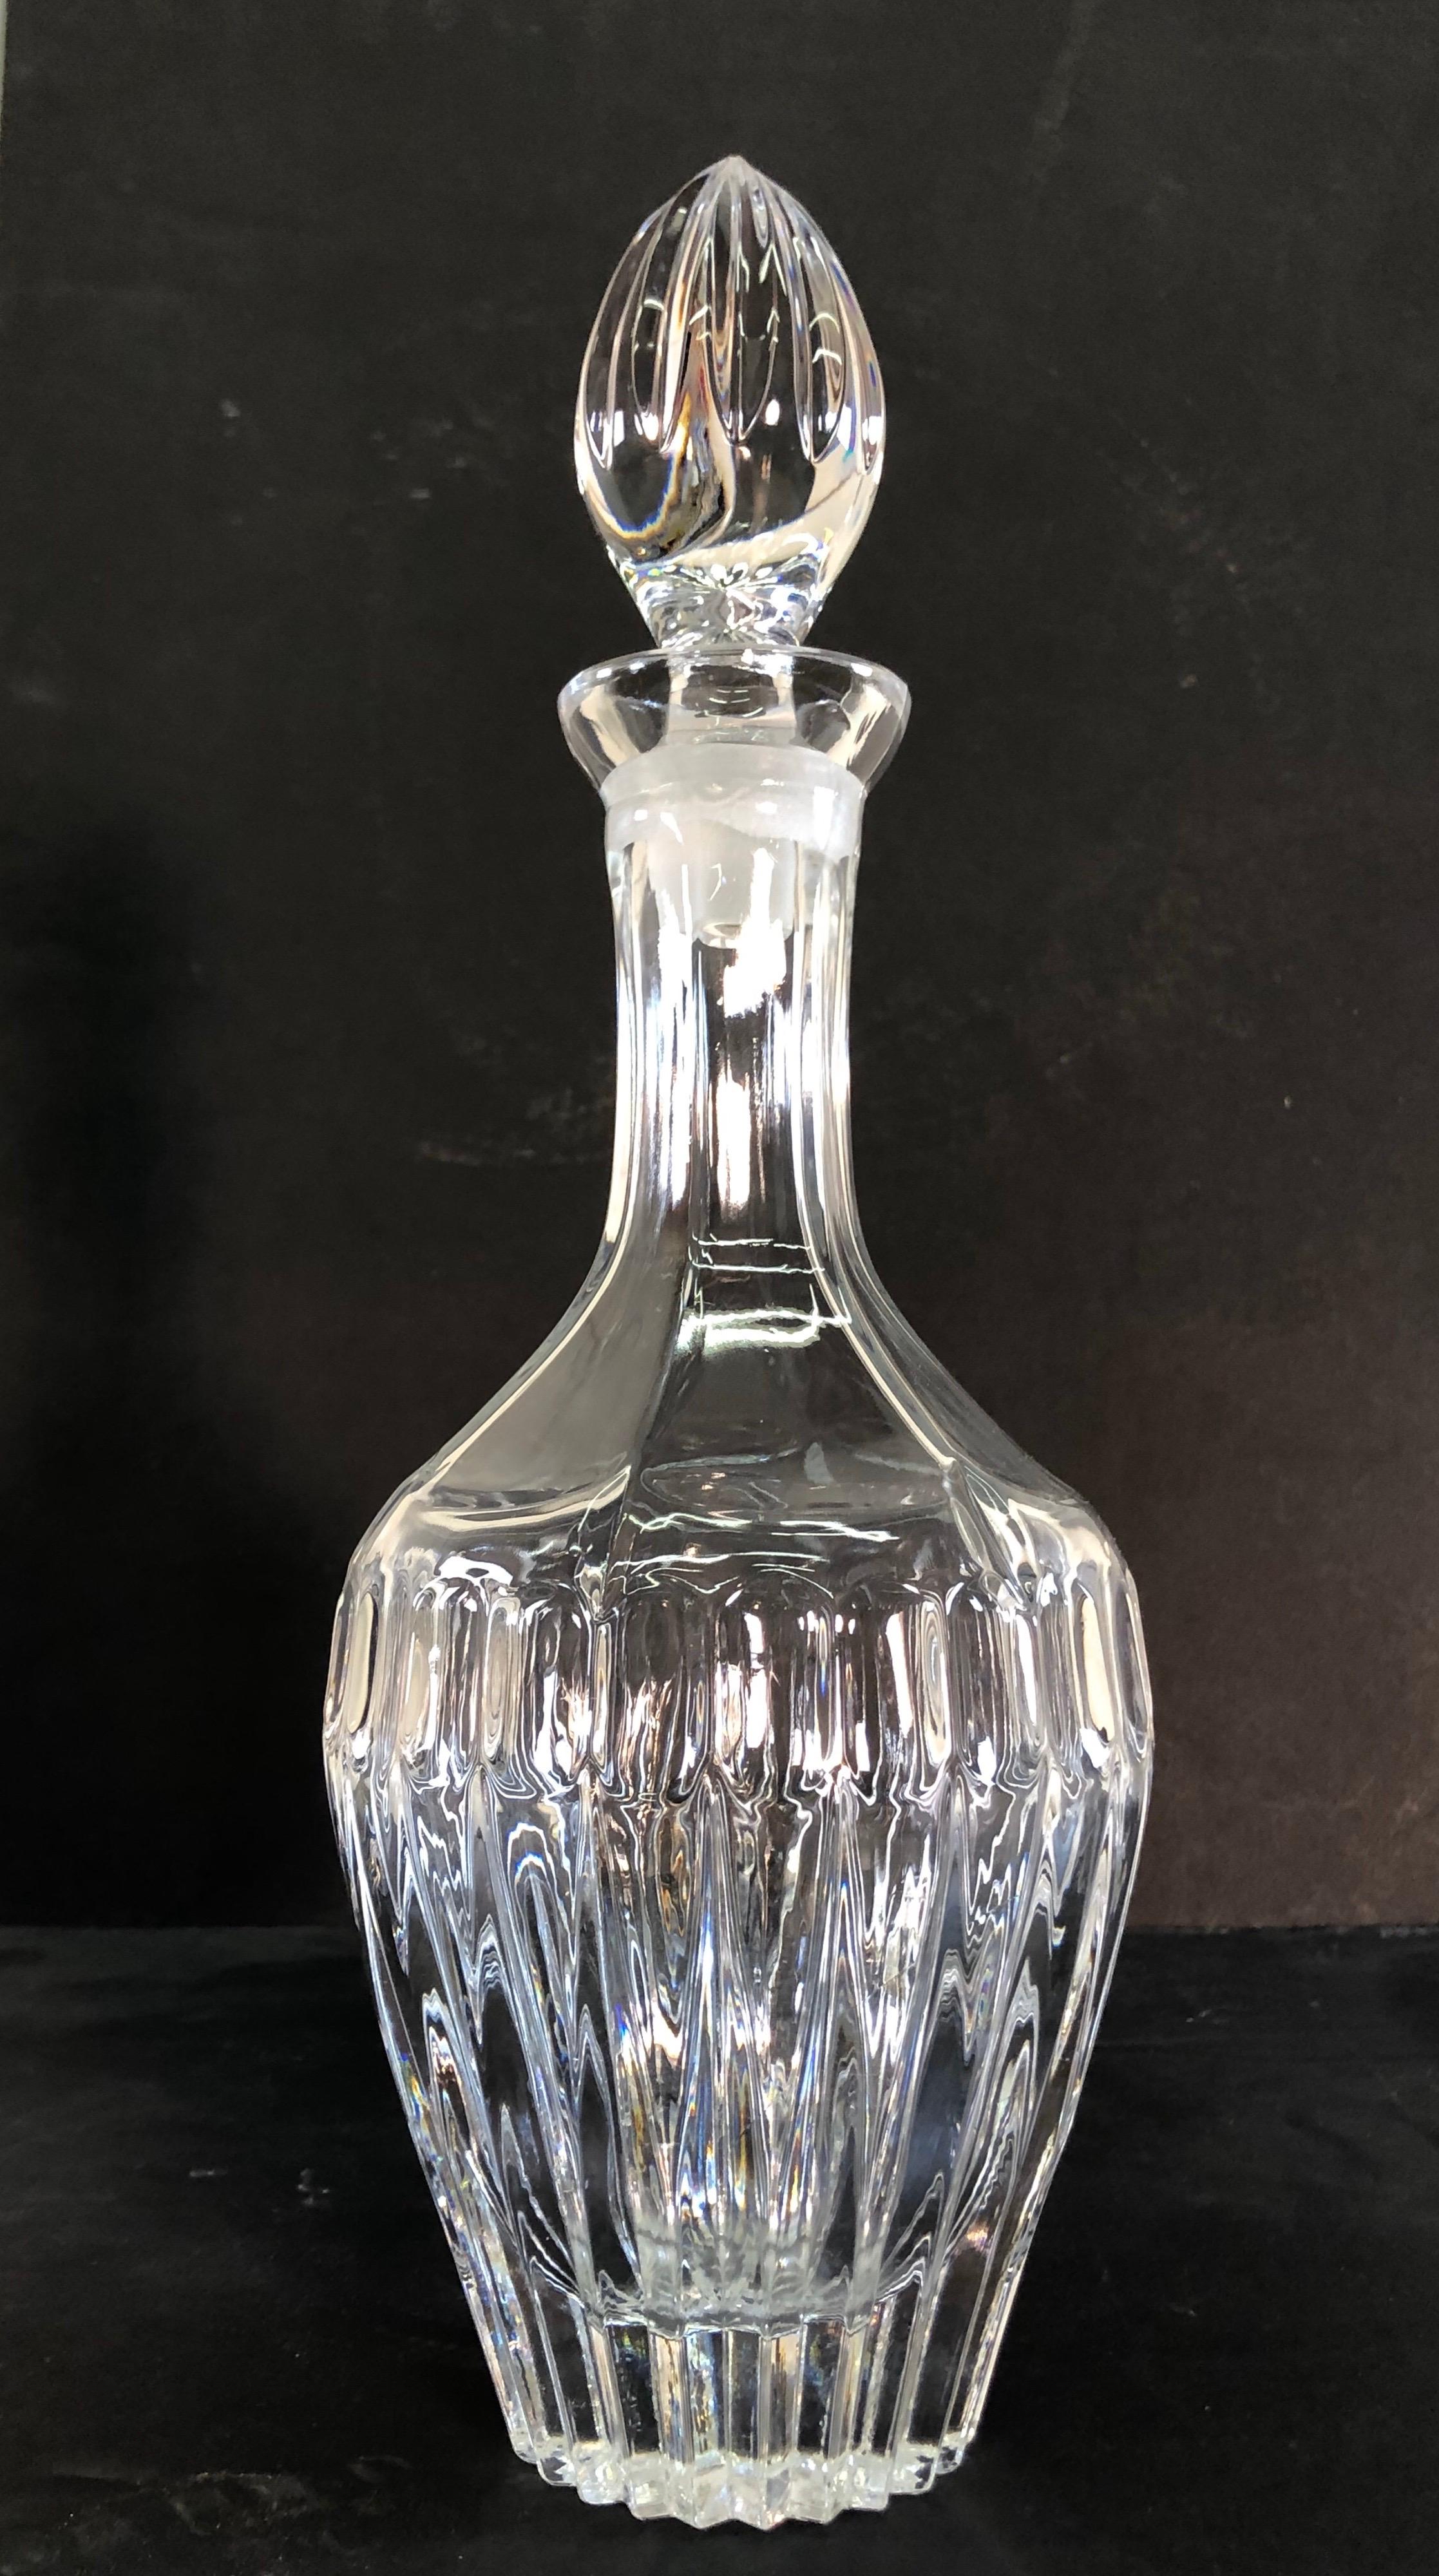 Vintage 1970s tall glass decanter with the stopper in a heavy glass design. No marks. Excellent condition.